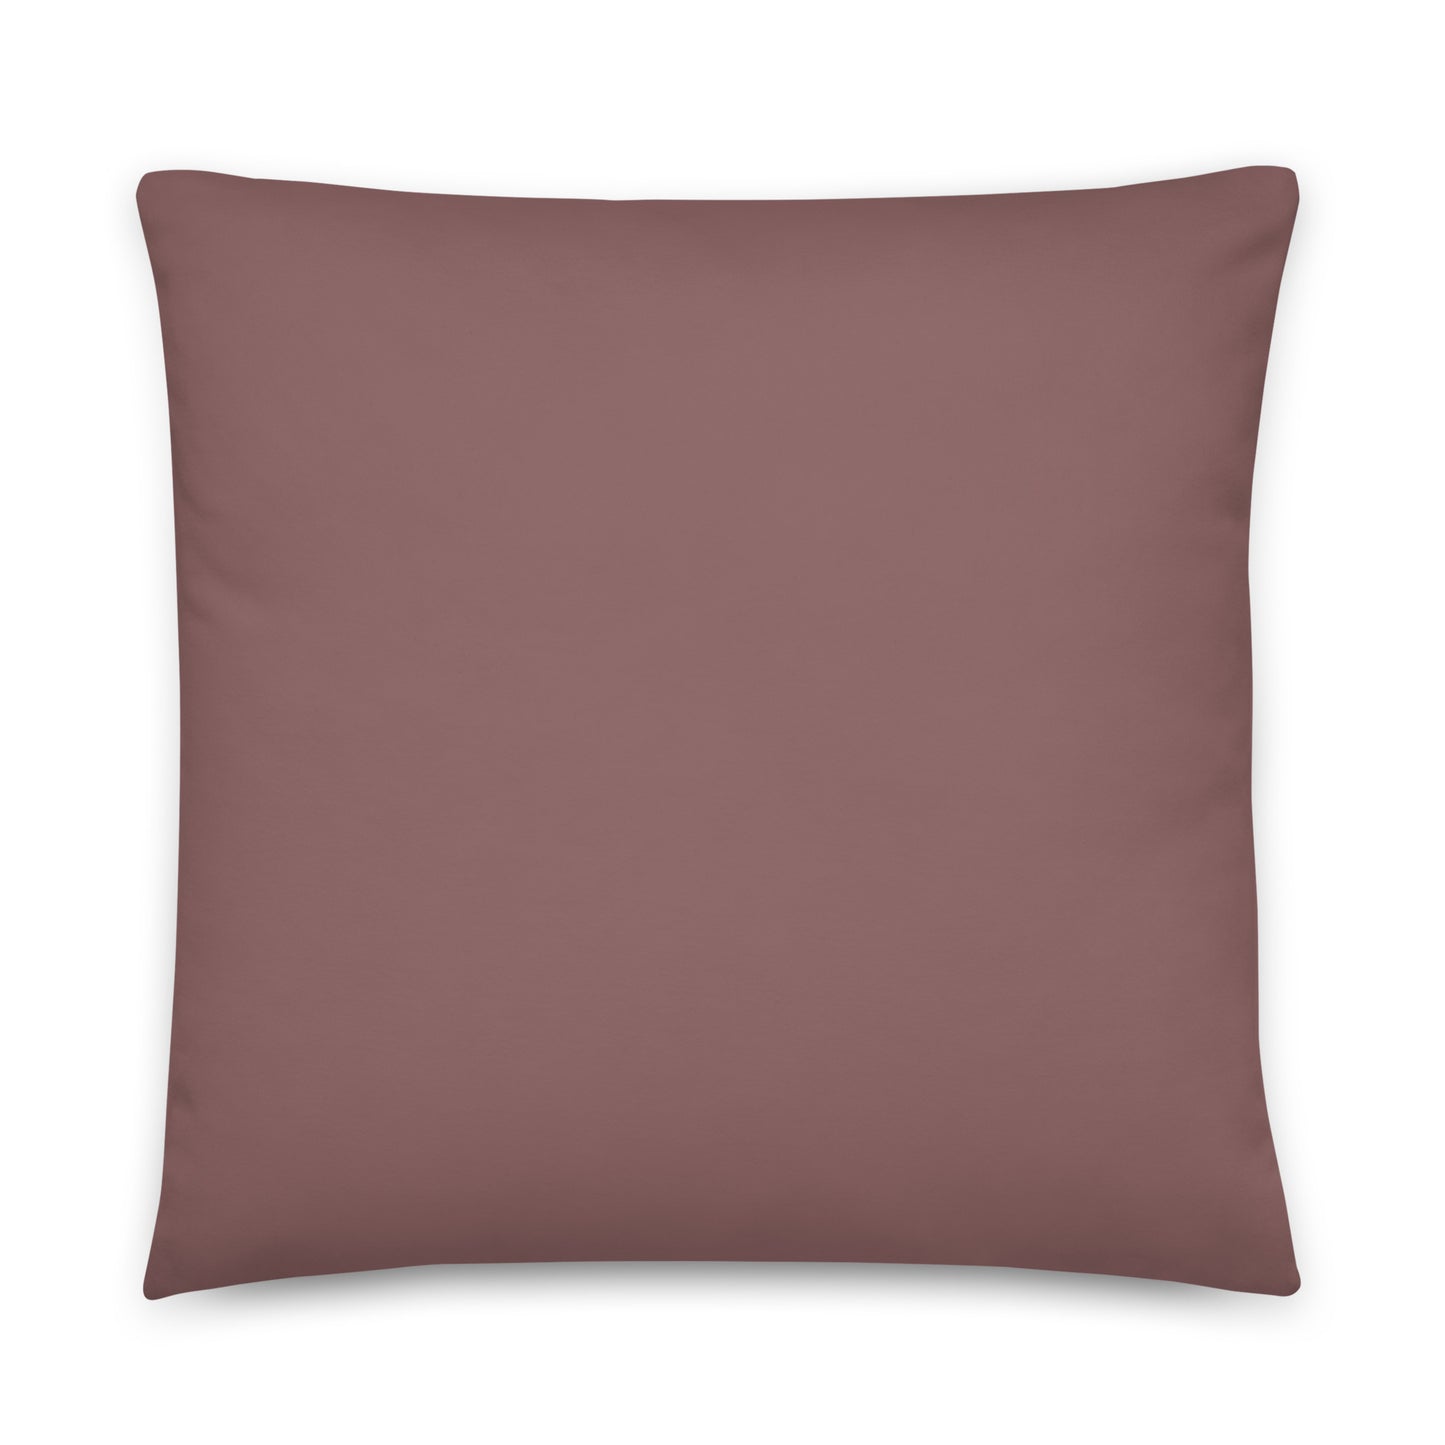 Basic Pinkish Brown - Sustainably Made Pillows